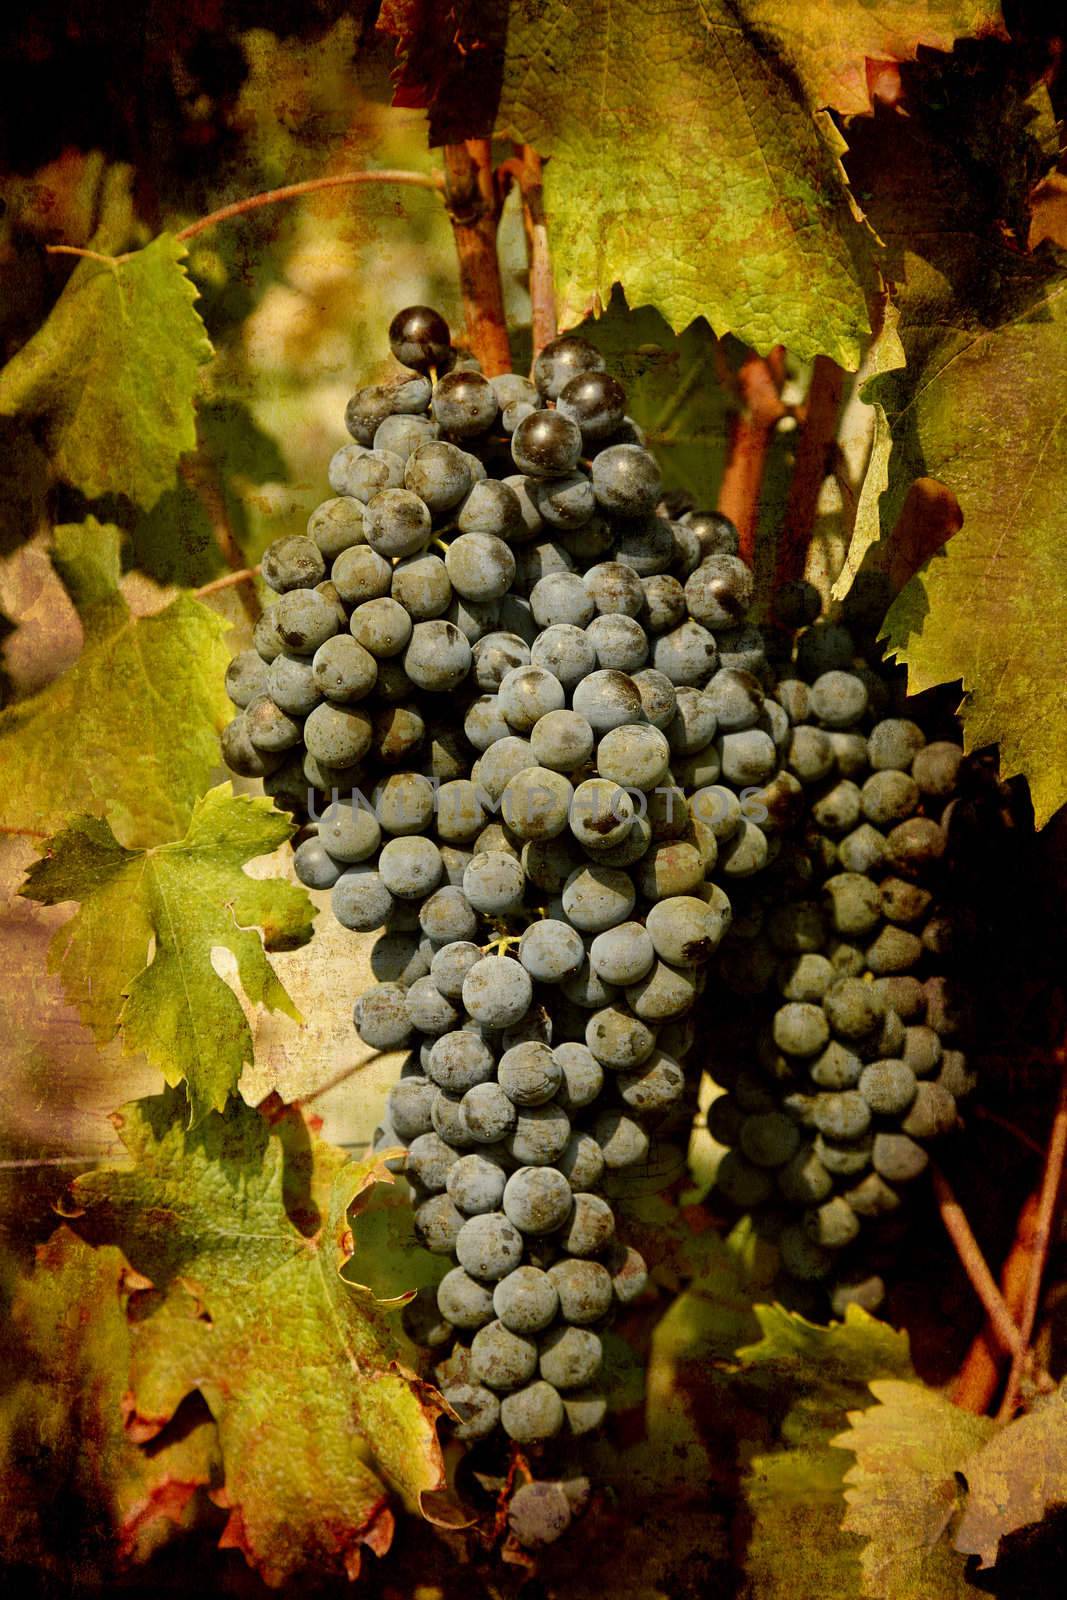 Blu ripe Nebbiolo grapes by ABCDK